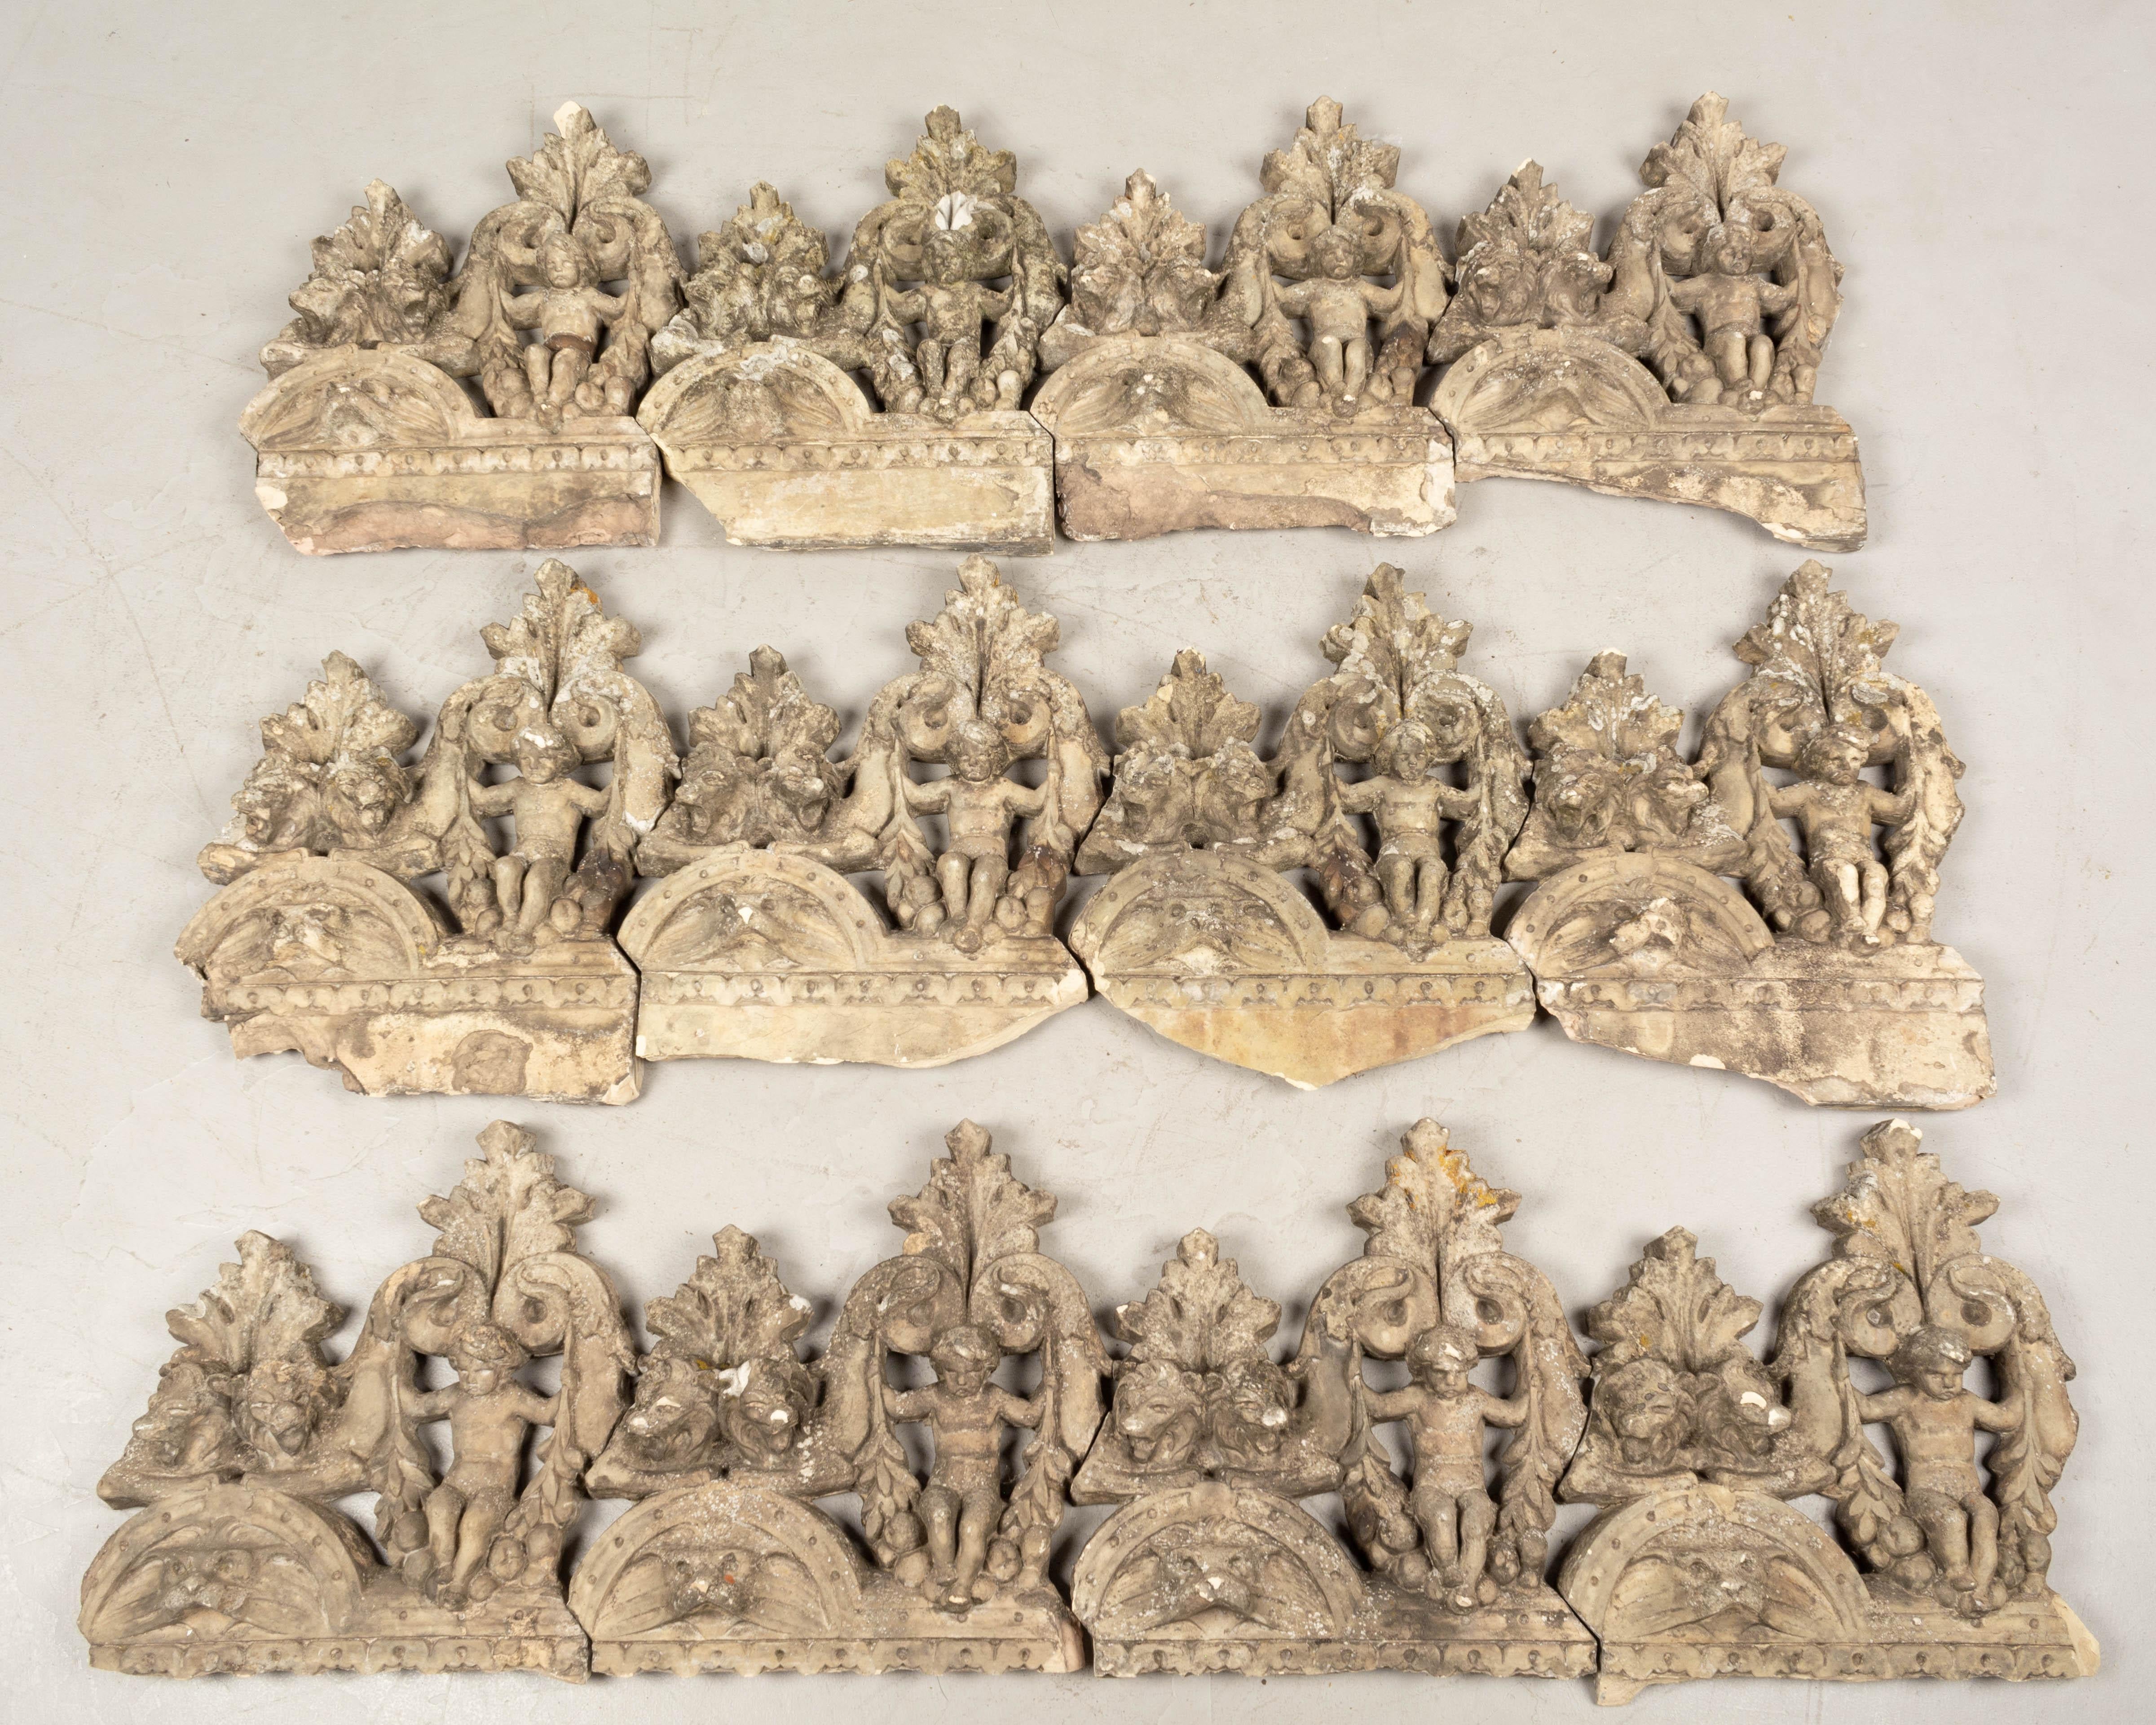 A set of twelve 19th century French terracotta garden tiles. Very large detailed casting of cupid with foliate details and lion heads. Rare form and scale. For use as border decoration, these tiles fit closely together and have a nice old mossy